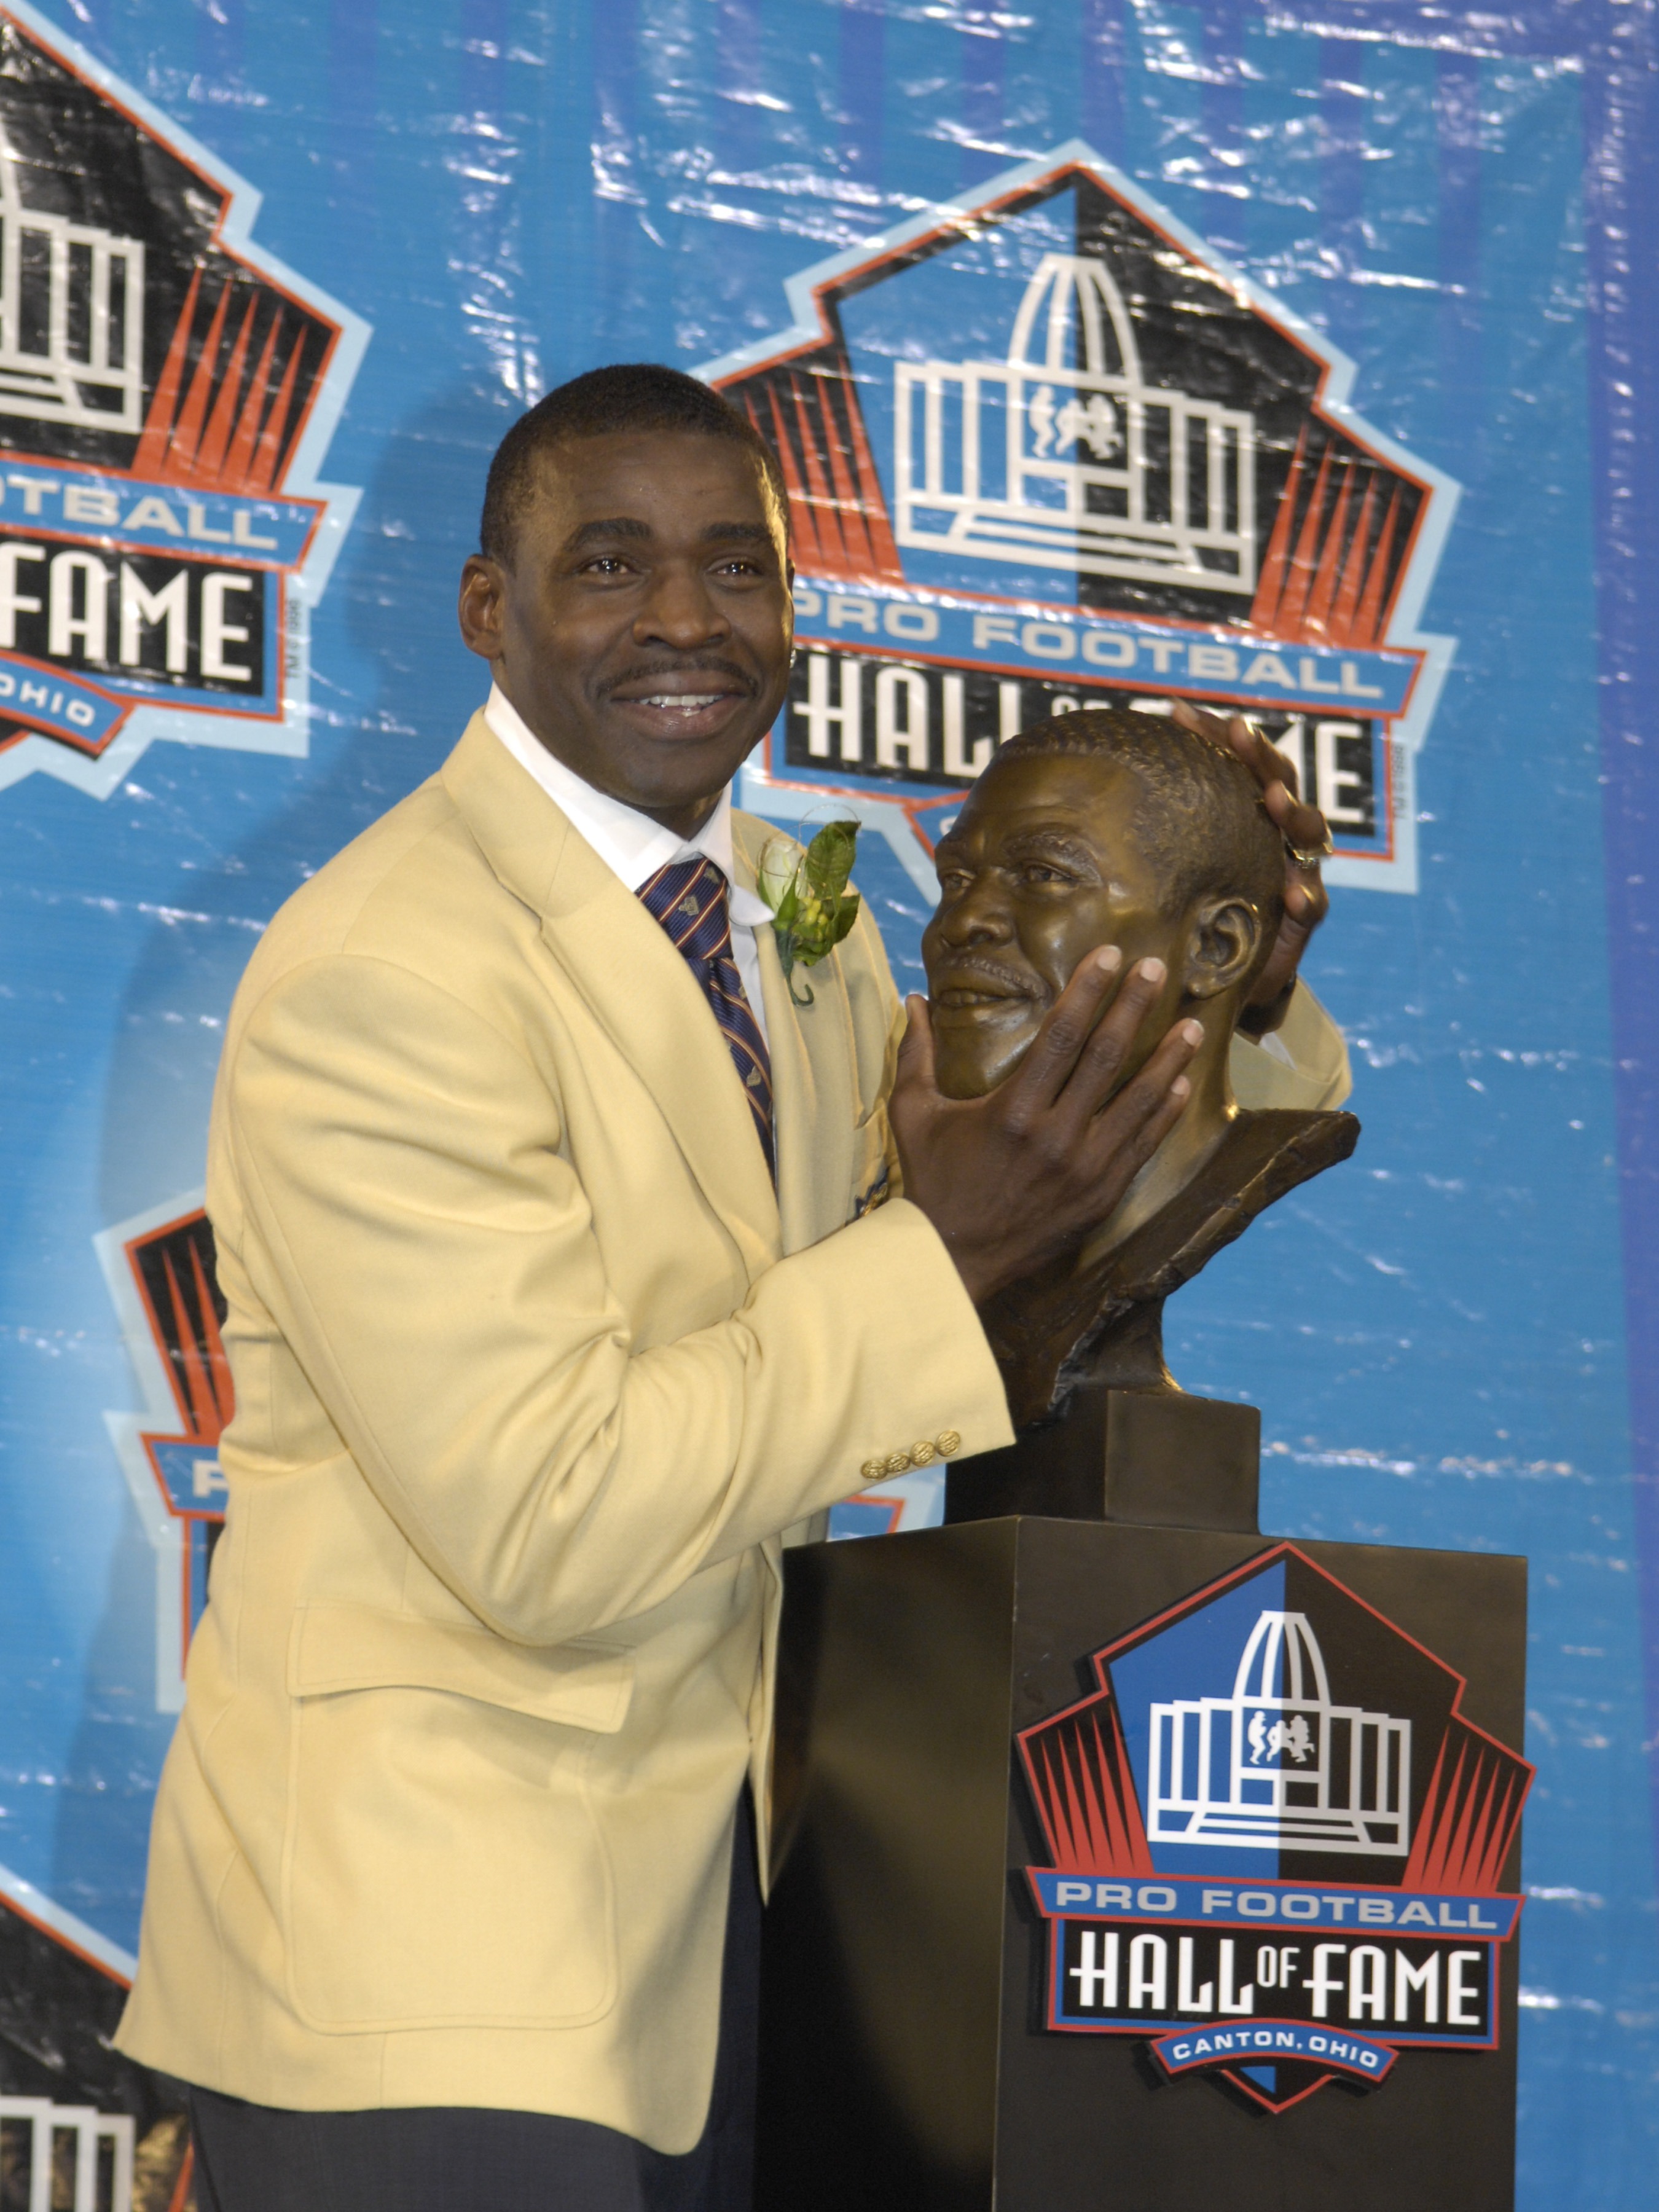 CANTON, OH - AUGUST 04: Michael Irvin checks out his bust during the Class of 2007 Pro Football Hall of Fame Enshrinement Ceremony August 4, 2007 in Canton, Ohio. (Photo by Al Messerschmidt/Getty Images)